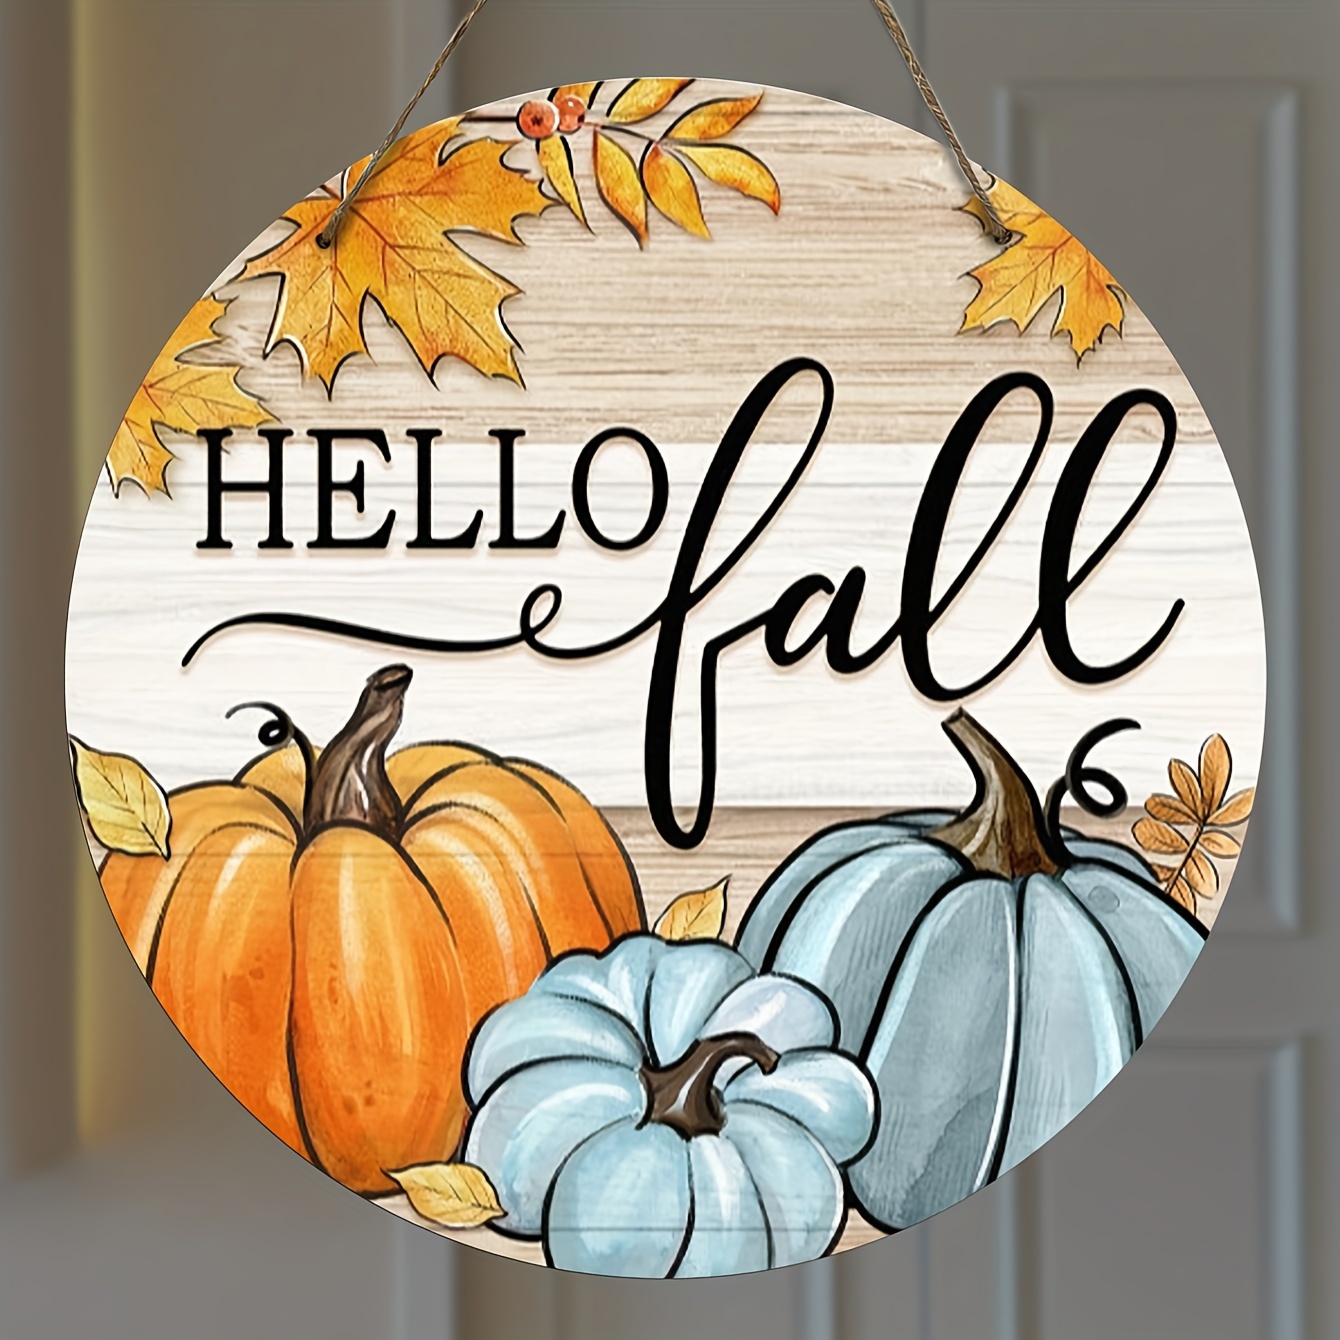 

1pc Rustic Wooden Round Wall Sign "hello Fall" With Pumpkins And Autumn Leaves, 9.84 Inches, Festive Harvest Home Decor Hanging Plaque